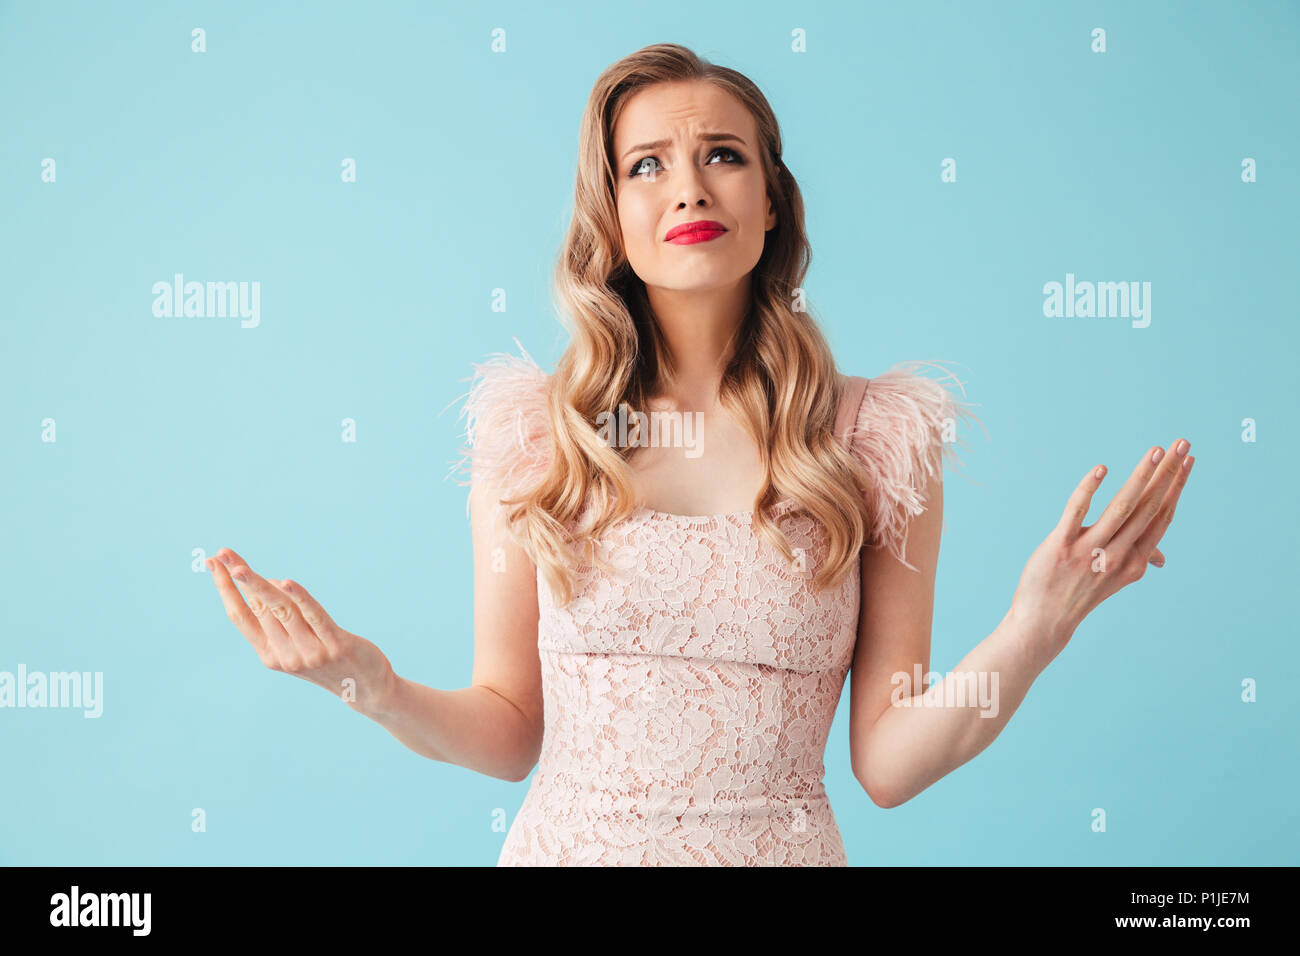 Image of Confused displeased blonde woman in dress looking up over turquoise background Stock Photo